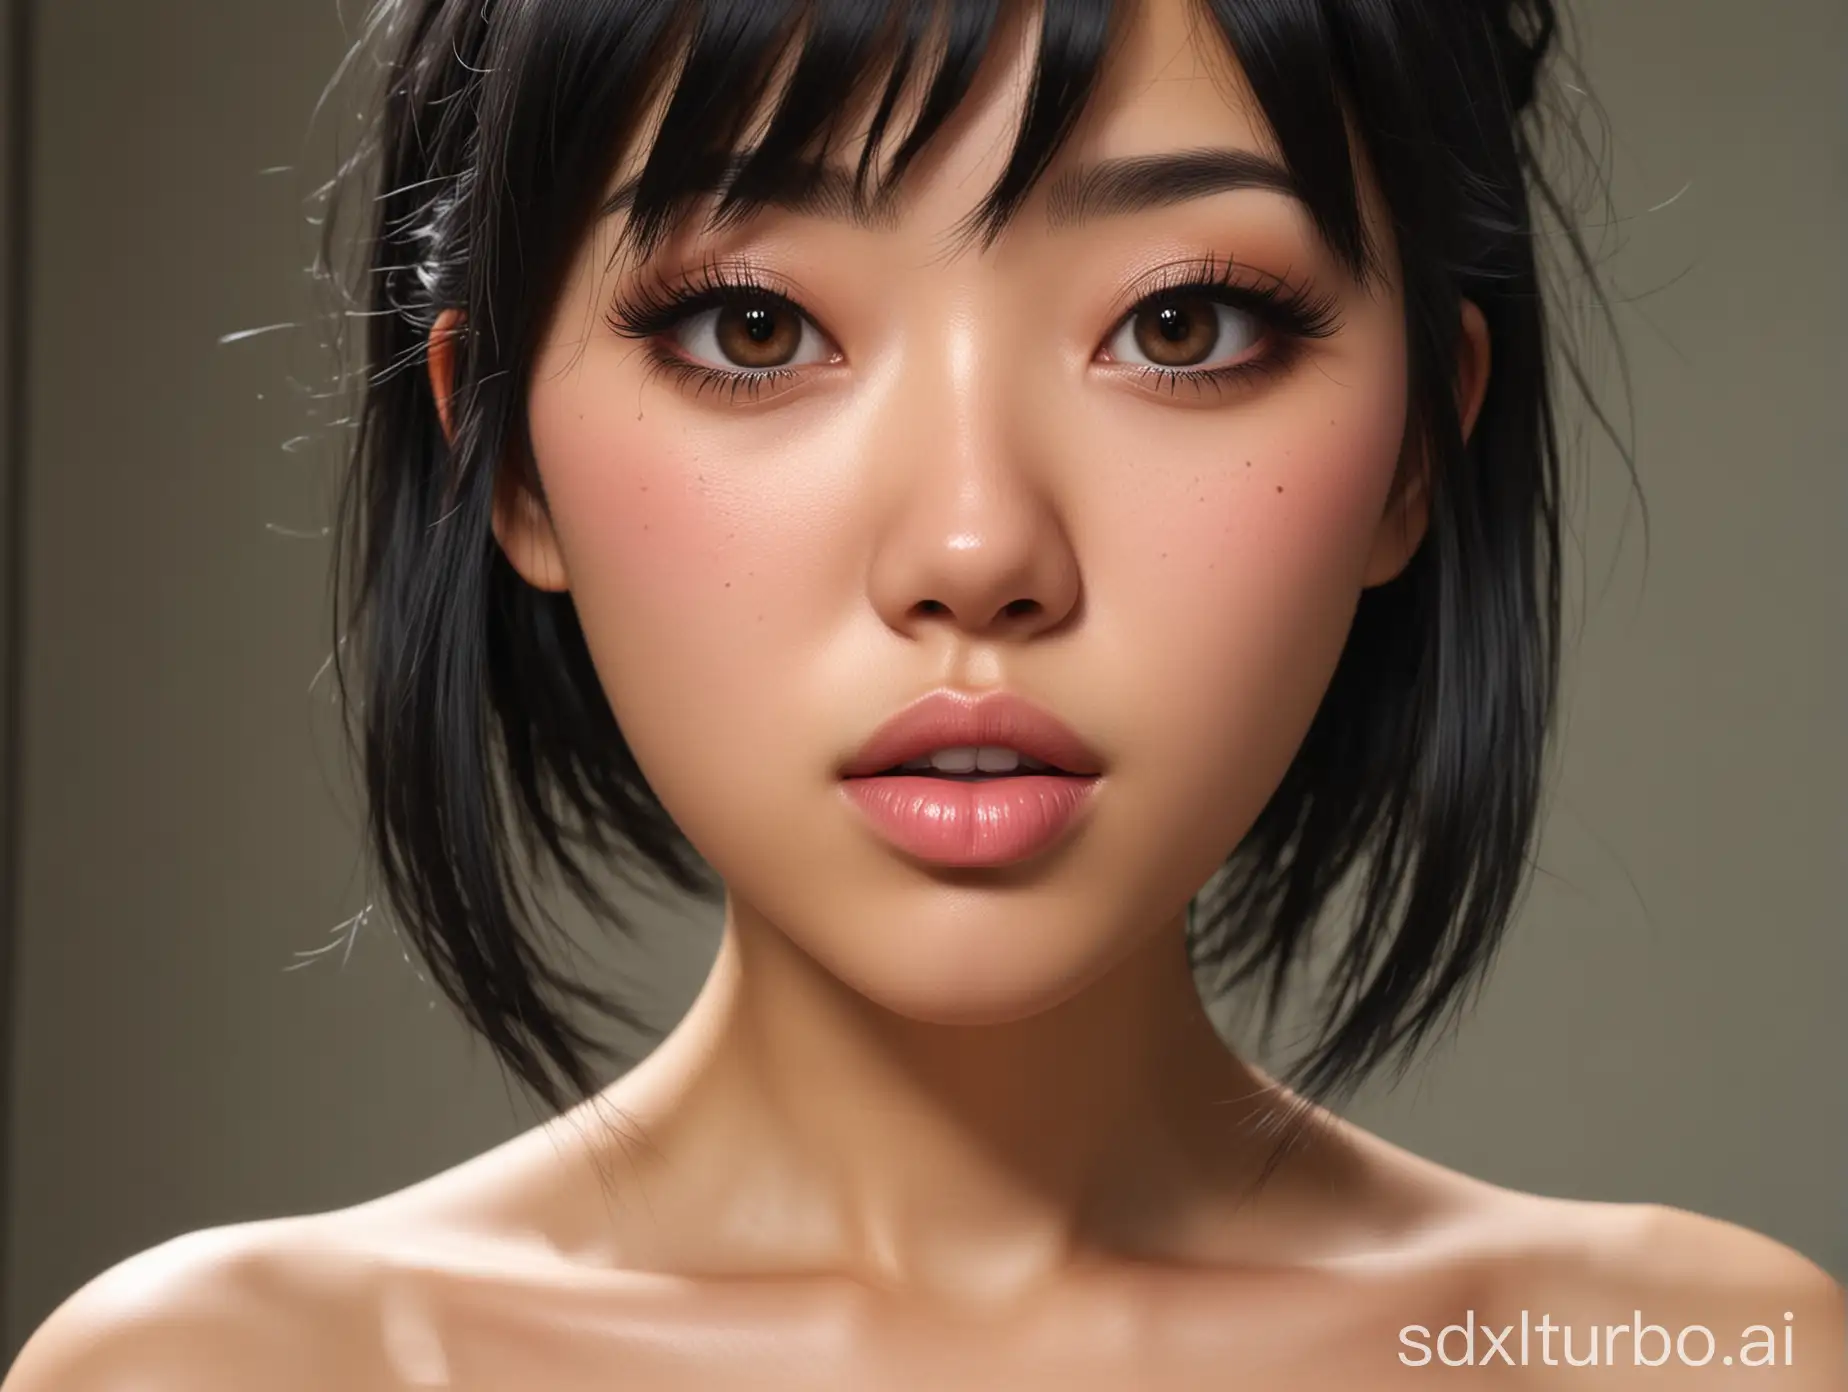 Realistic-Asian-Woman-with-Black-Hair-Gazing-into-Mirror